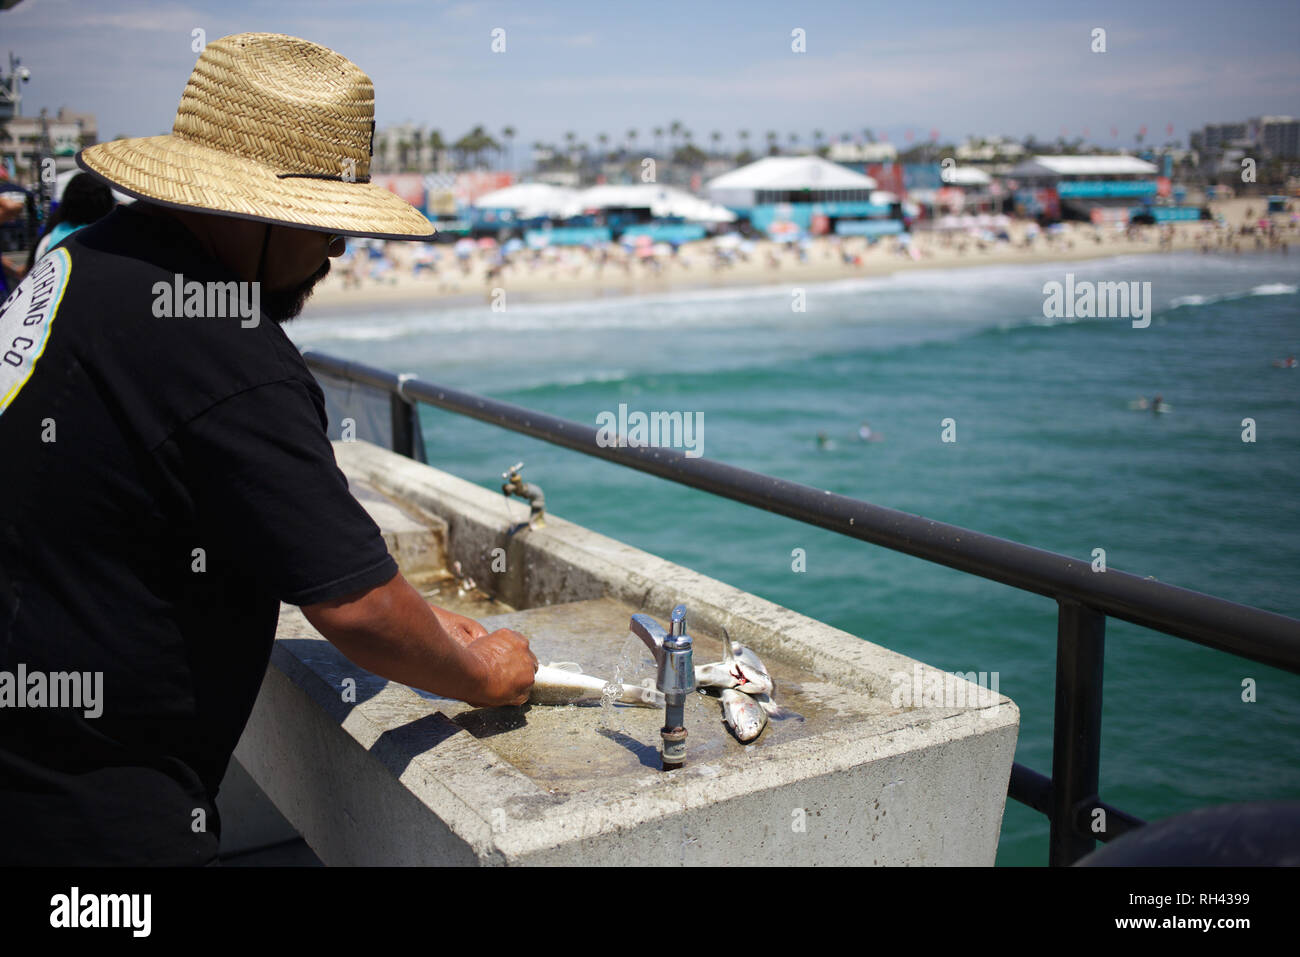 Cleaning fish - A man cleans his fresh catch from the pier in Huntington Beach, CA. In the background you can see the setup for the US open of surfing Stock Photo